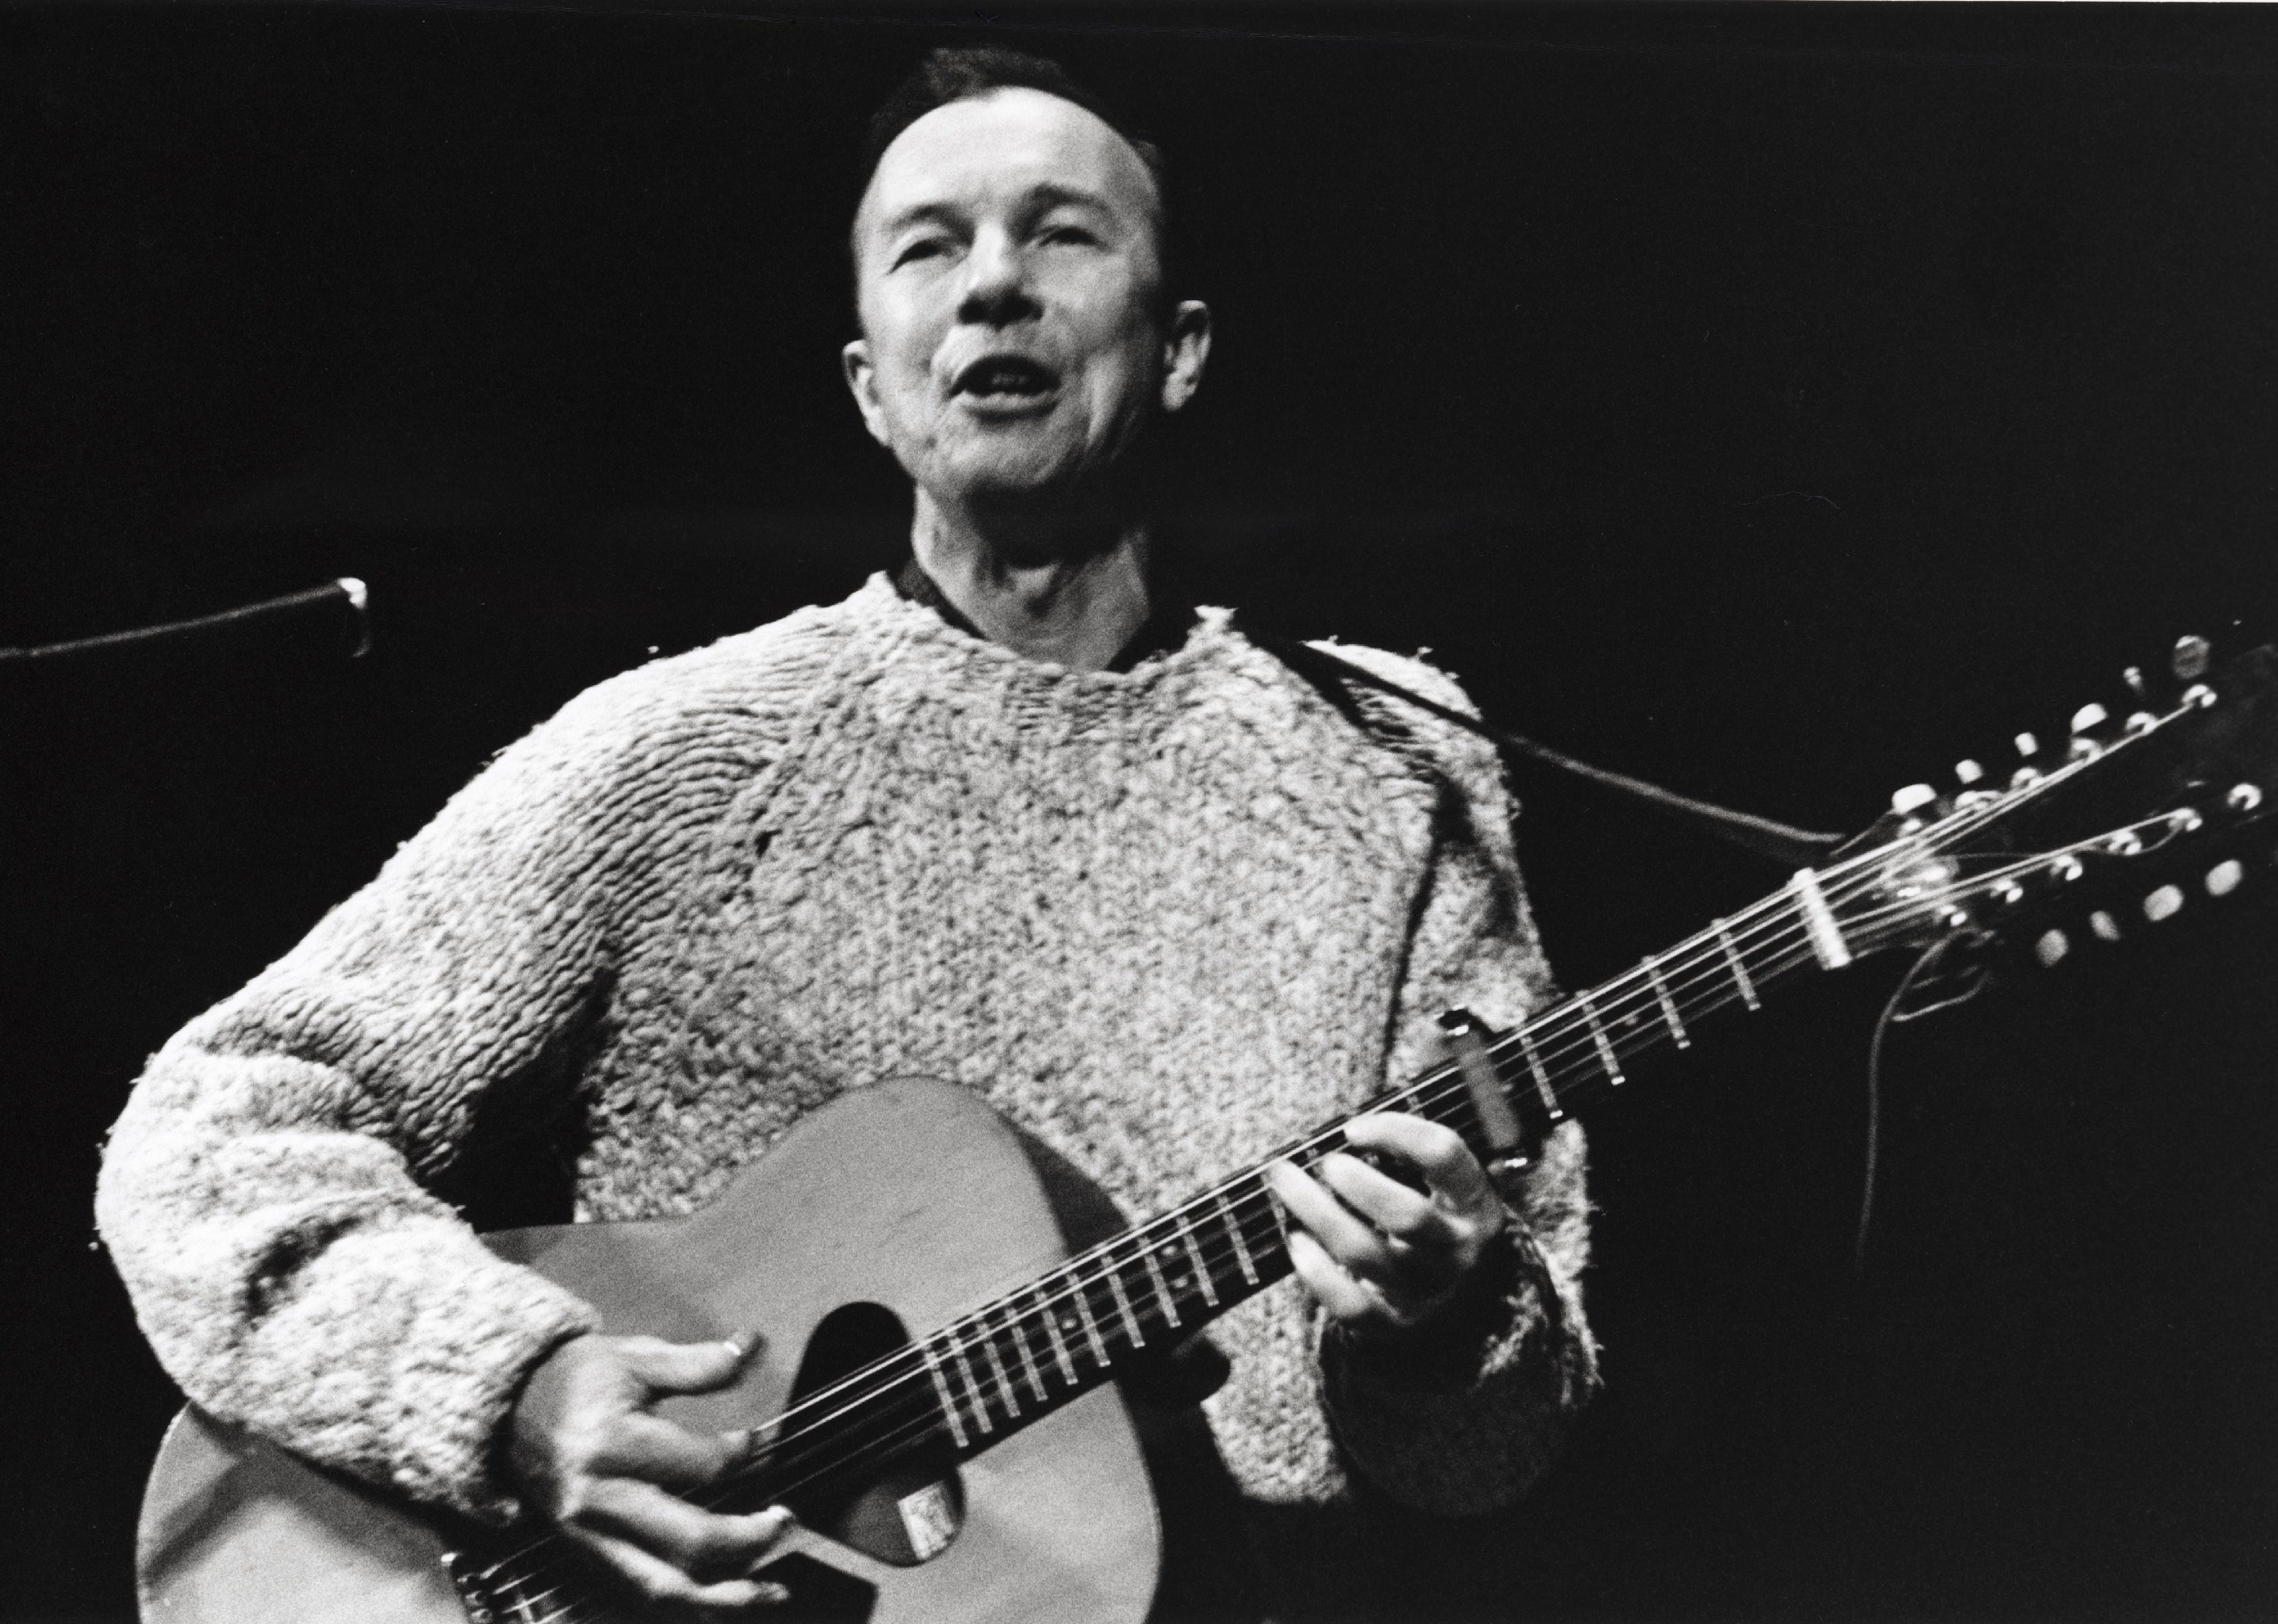 Pete Seeger performing on stage at a Paul Robeson benefit concert.